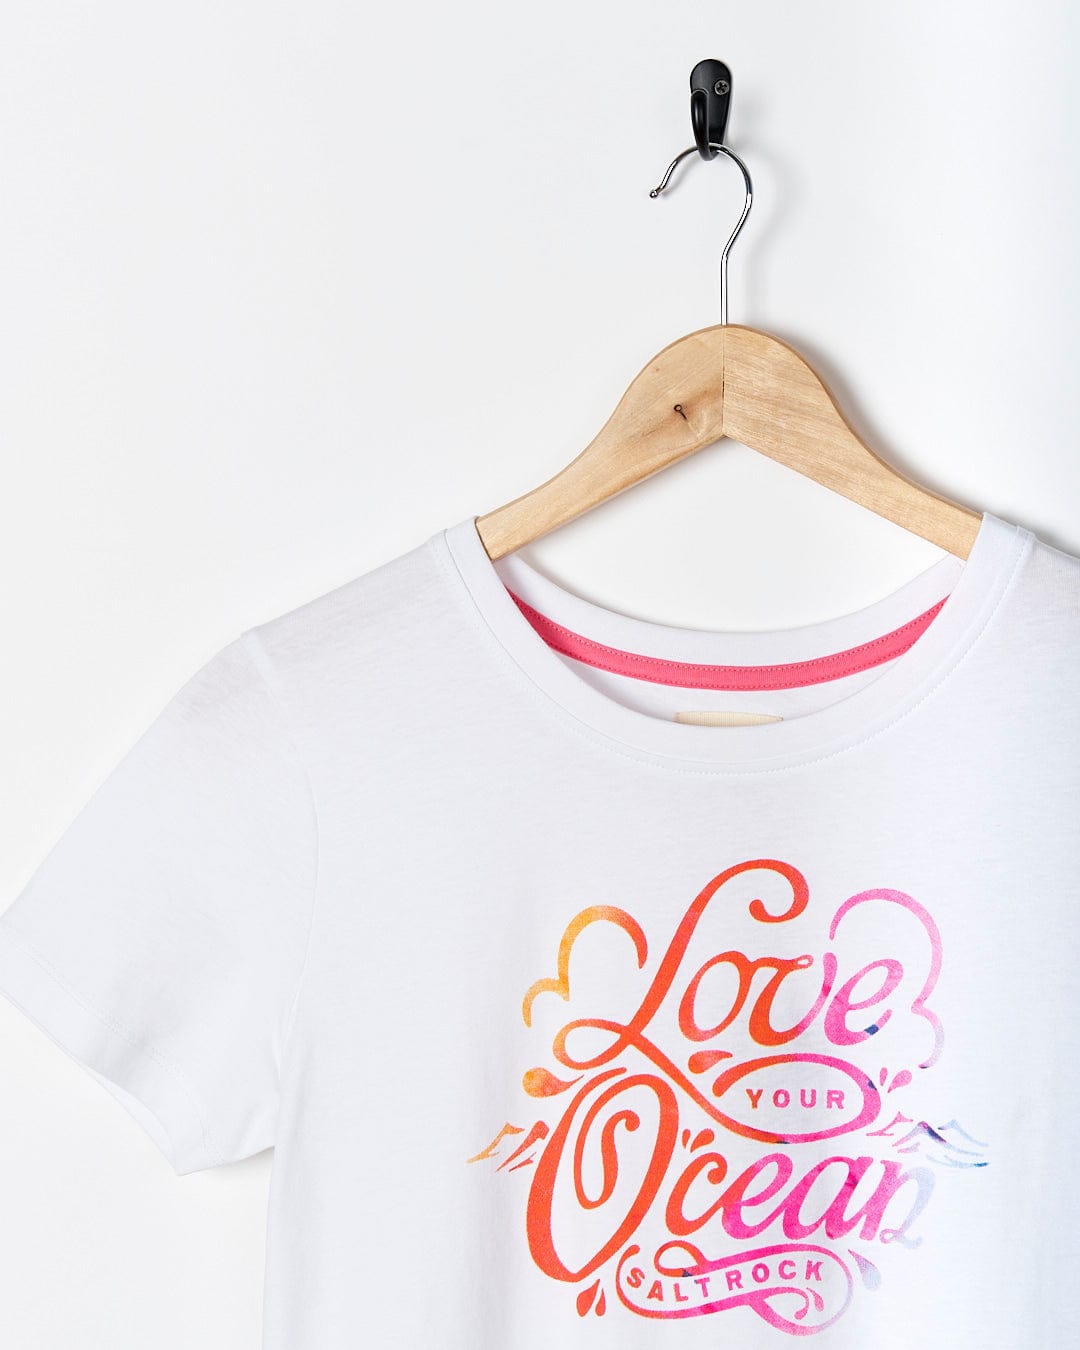 A Saltrock Love Your Ocean - Womens Short Sleeve T-Shirt - White with the words love the ocean on it.